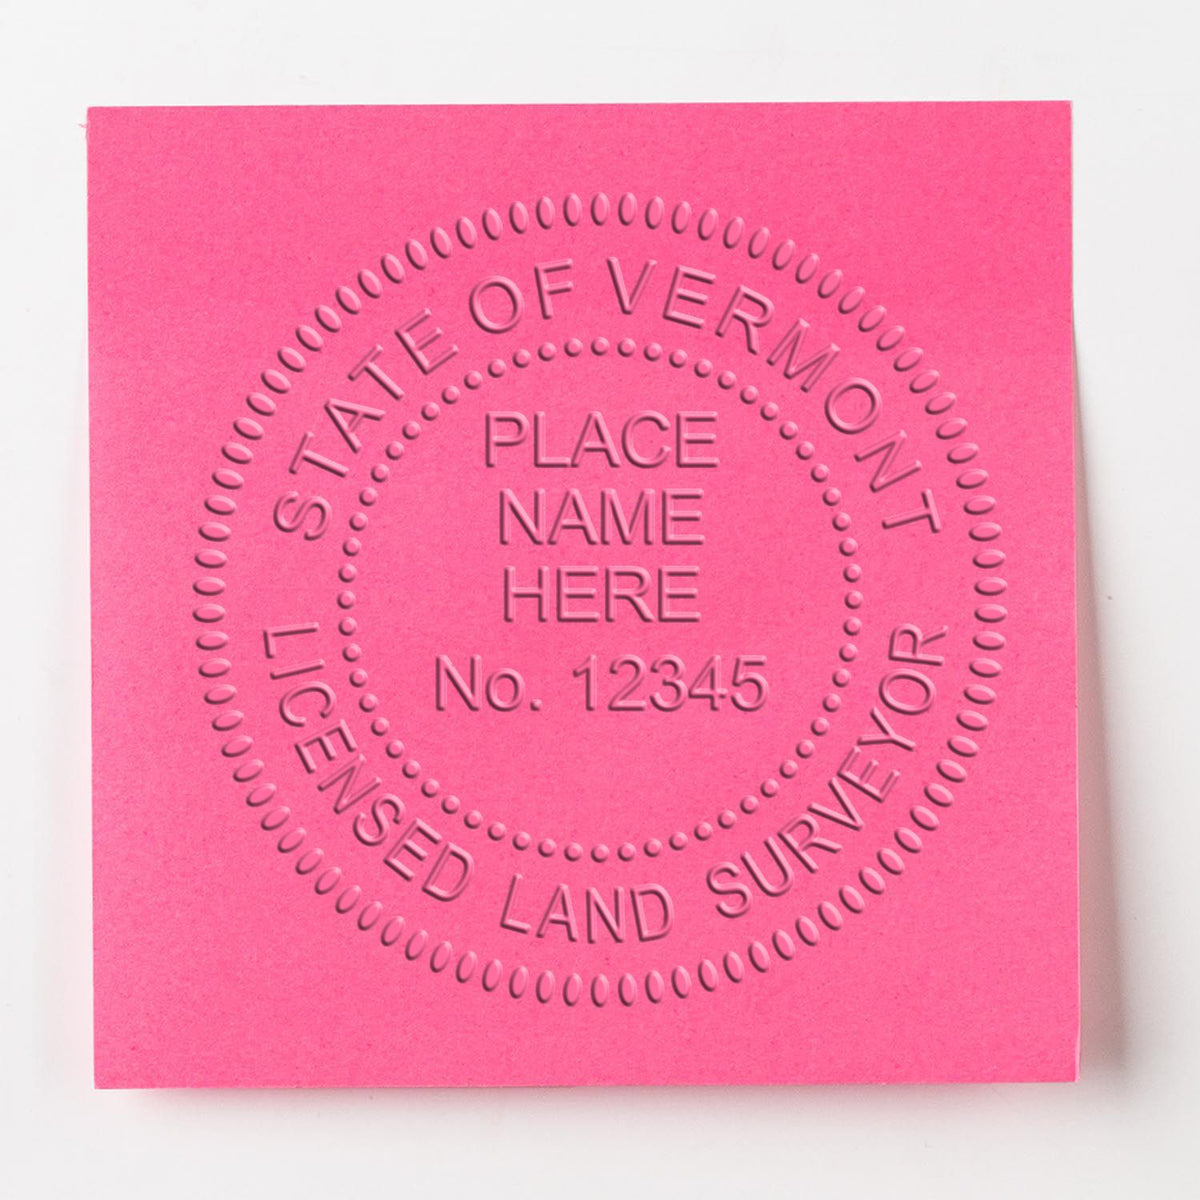 An in use photo of the Gift Vermont Land Surveyor Seal showing a sample imprint on a cardstock